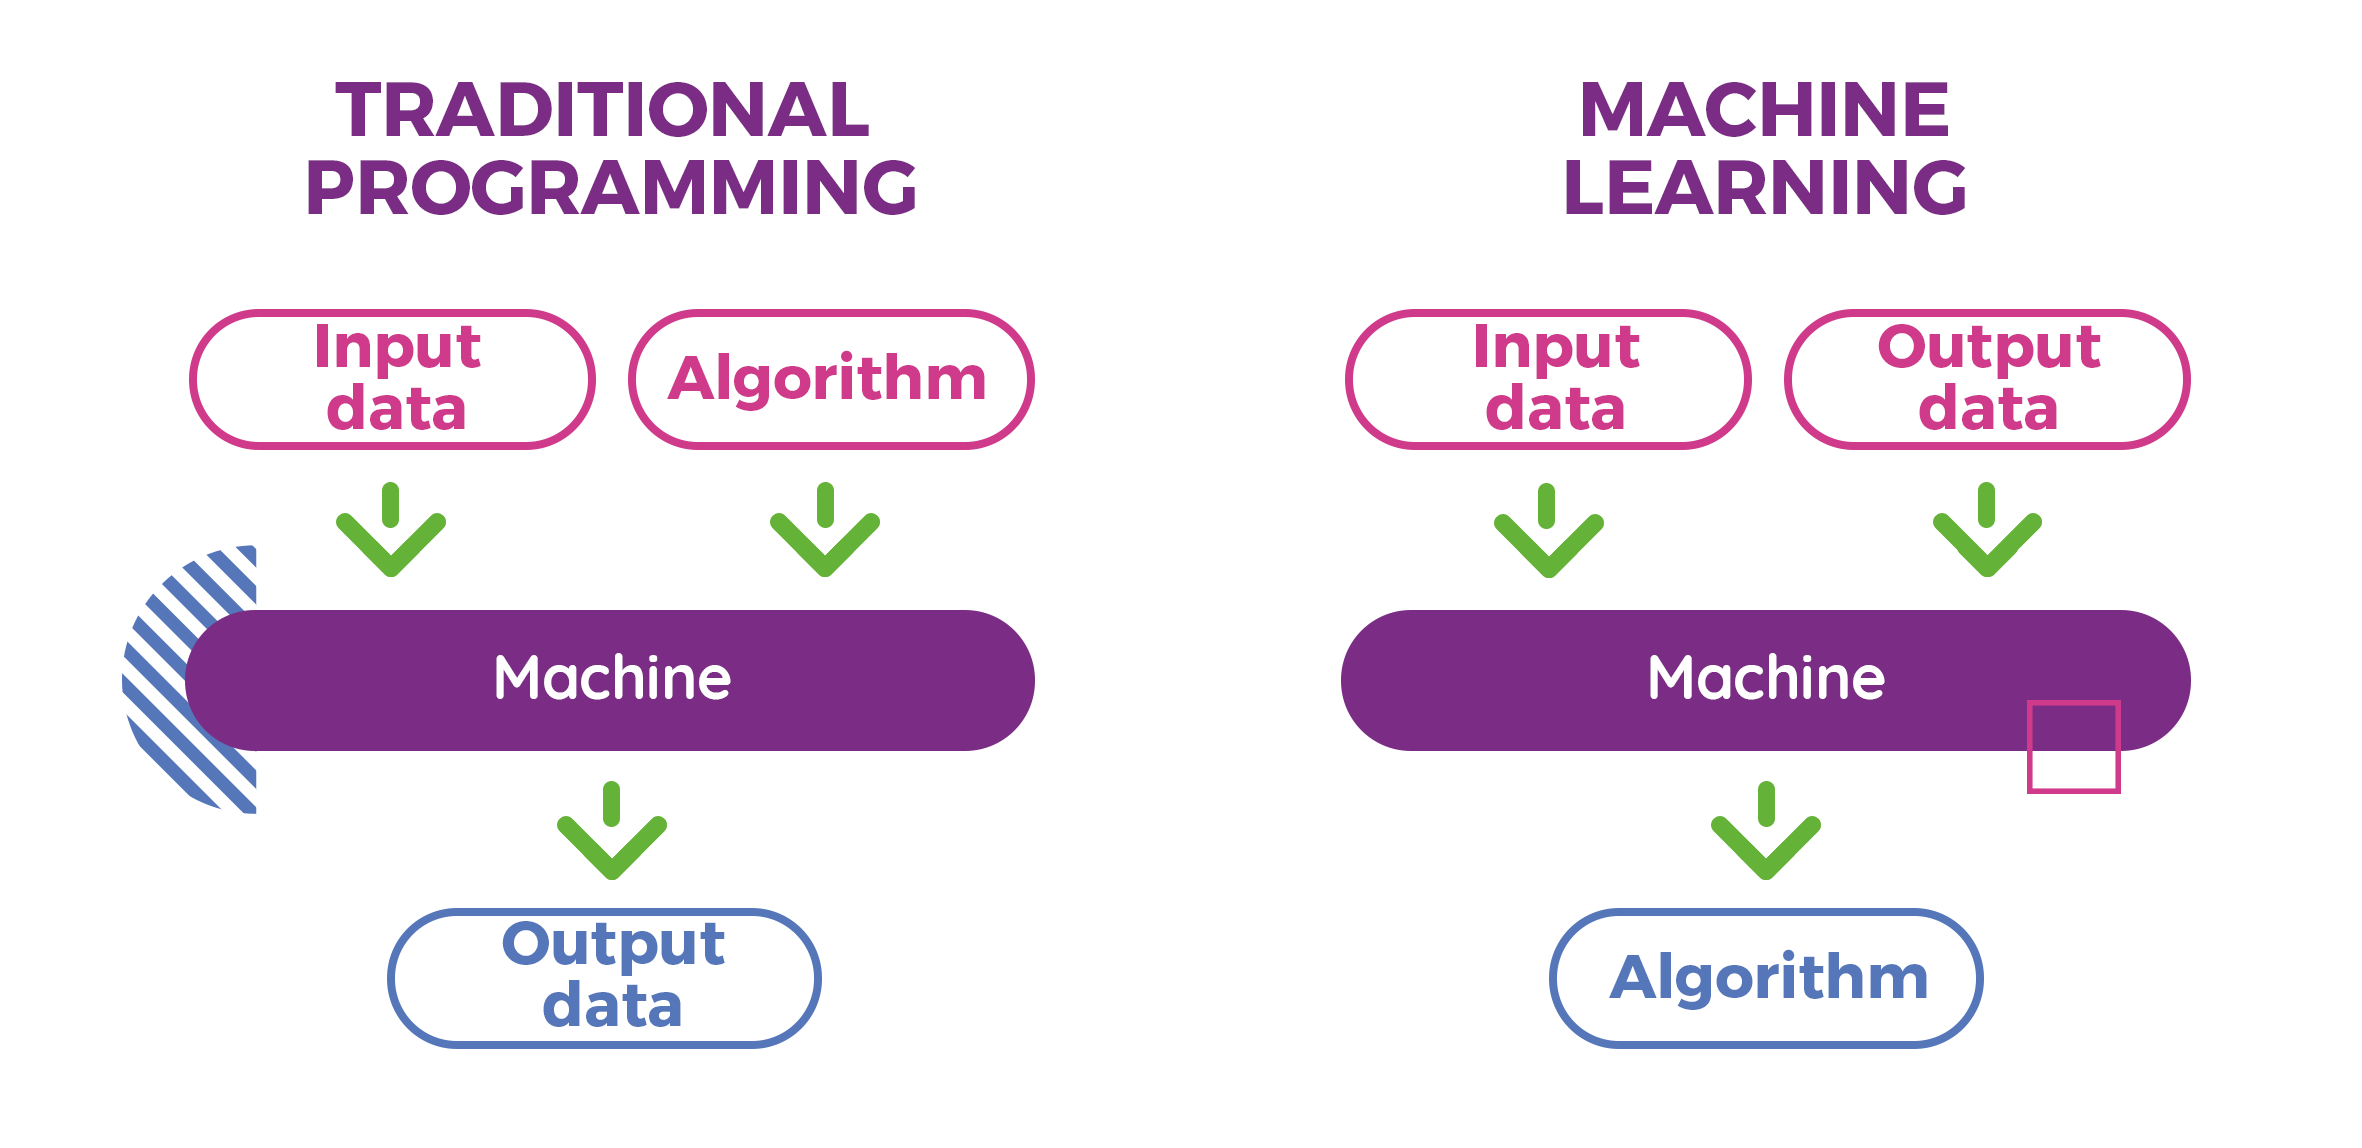 machine learning differs from traditional programming